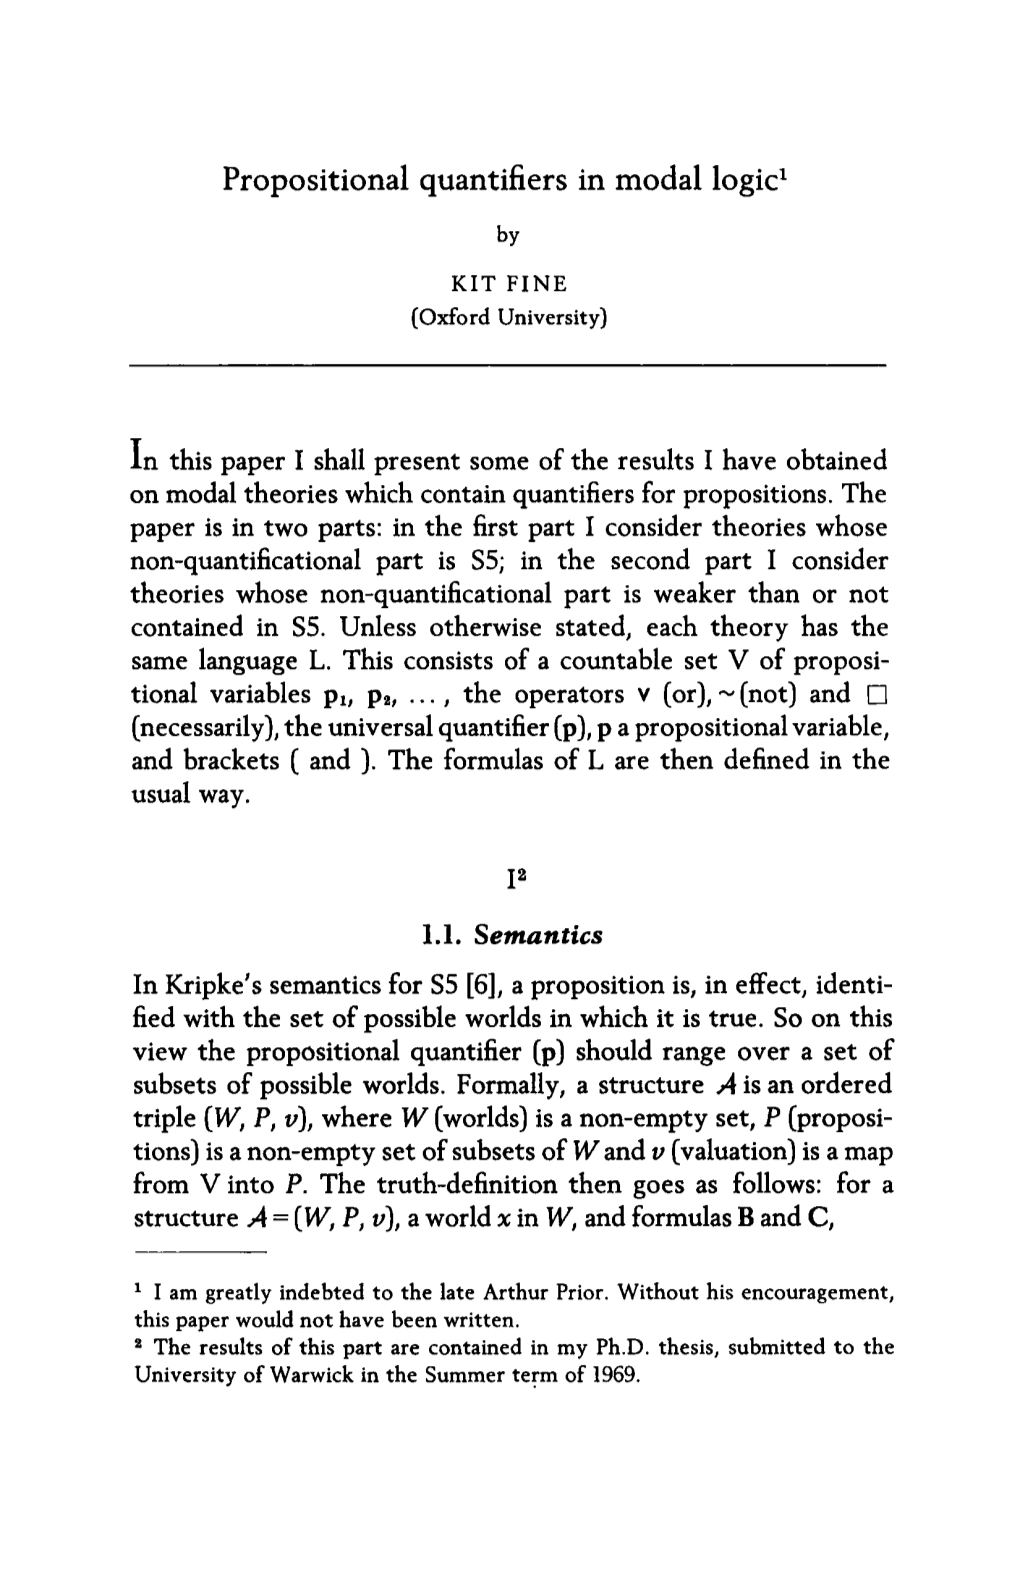 Propositional Quantifiers in Modal Logic1